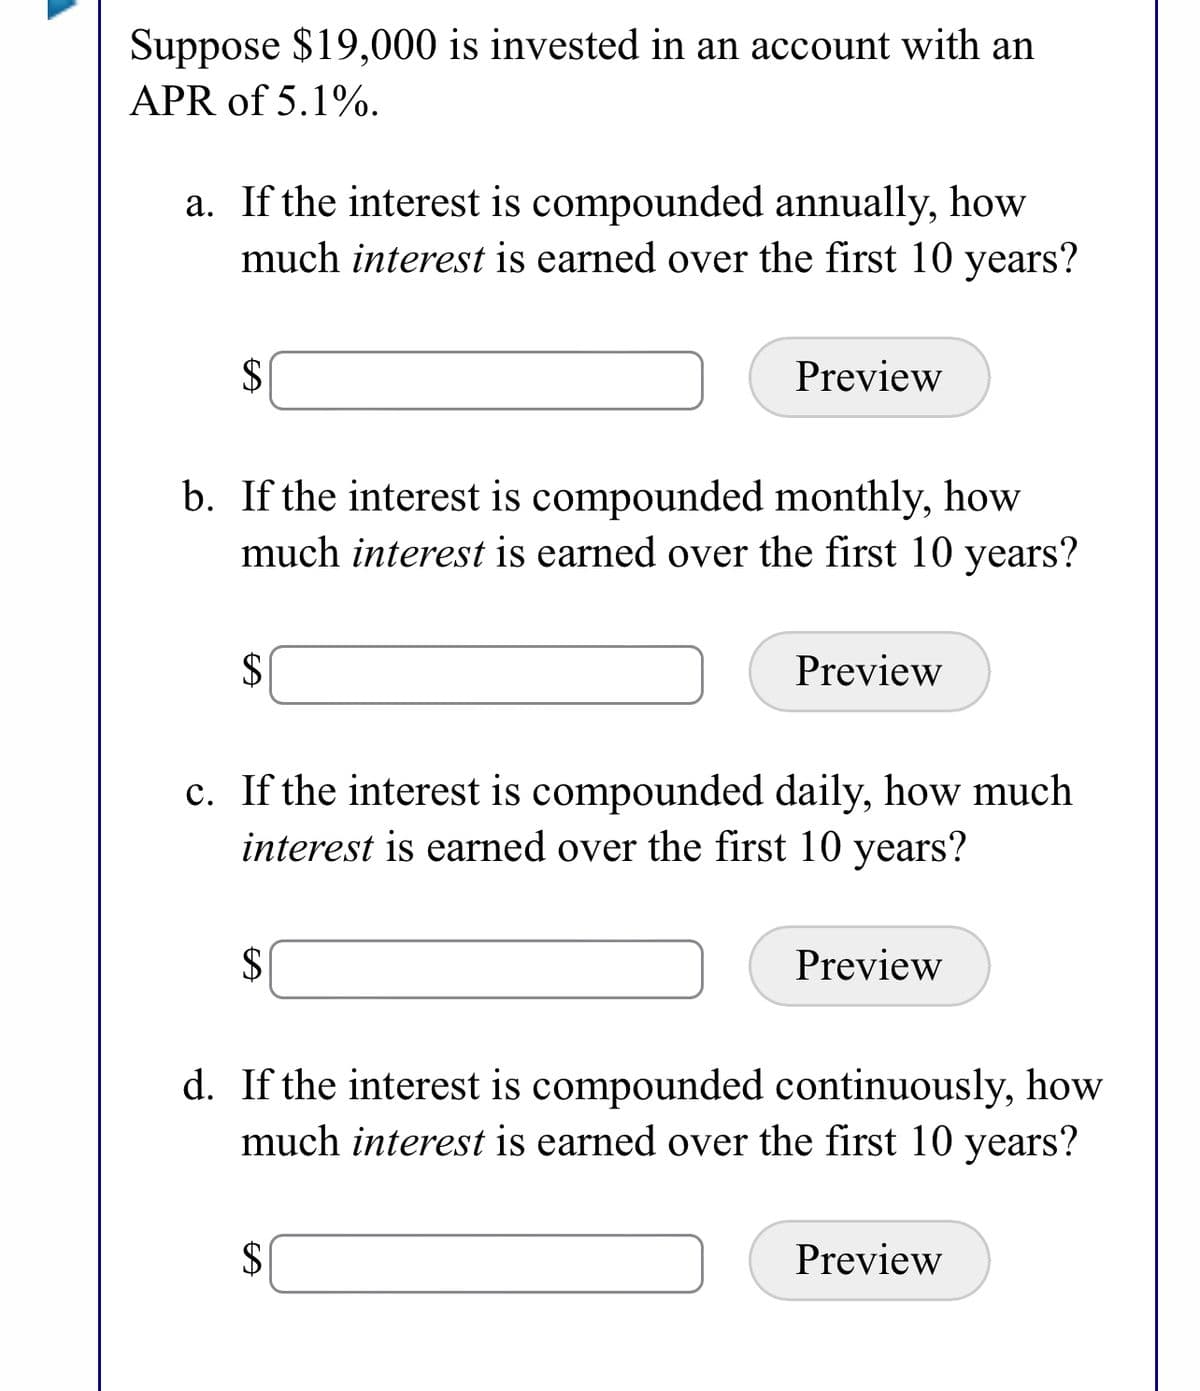 Suppose $19,000 is invested in an account with an
APR of 5.1%.
a. If the interest is compounded annually, how
much interest is earned over the first 10 years?
2$
Preview
b. If the interest is compounded monthly, how
much interest is earned over the first 10 years?
$
Preview
c. If the interest is compounded daily, how much
interest is earned over the first 10 years?
2$
Preview
d. If the interest is compounded continuously, how
much interest is earned over the first 10 years?
$
Preview
